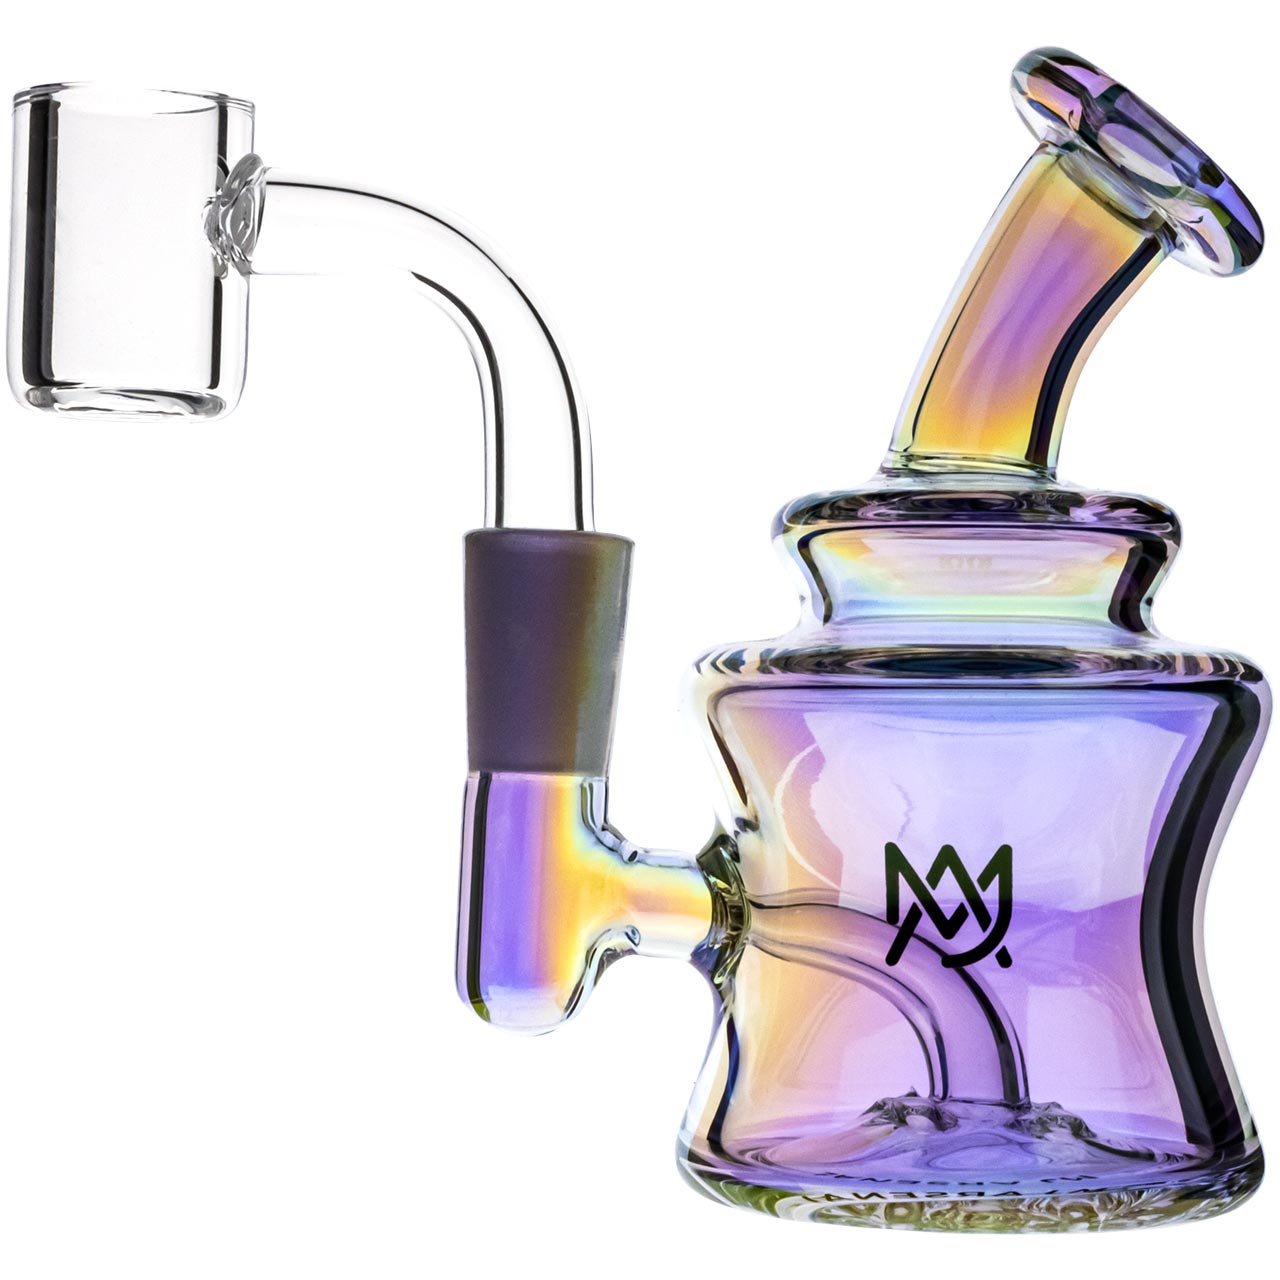 Iridescent Jammer mini rig from MJ Arsenal.